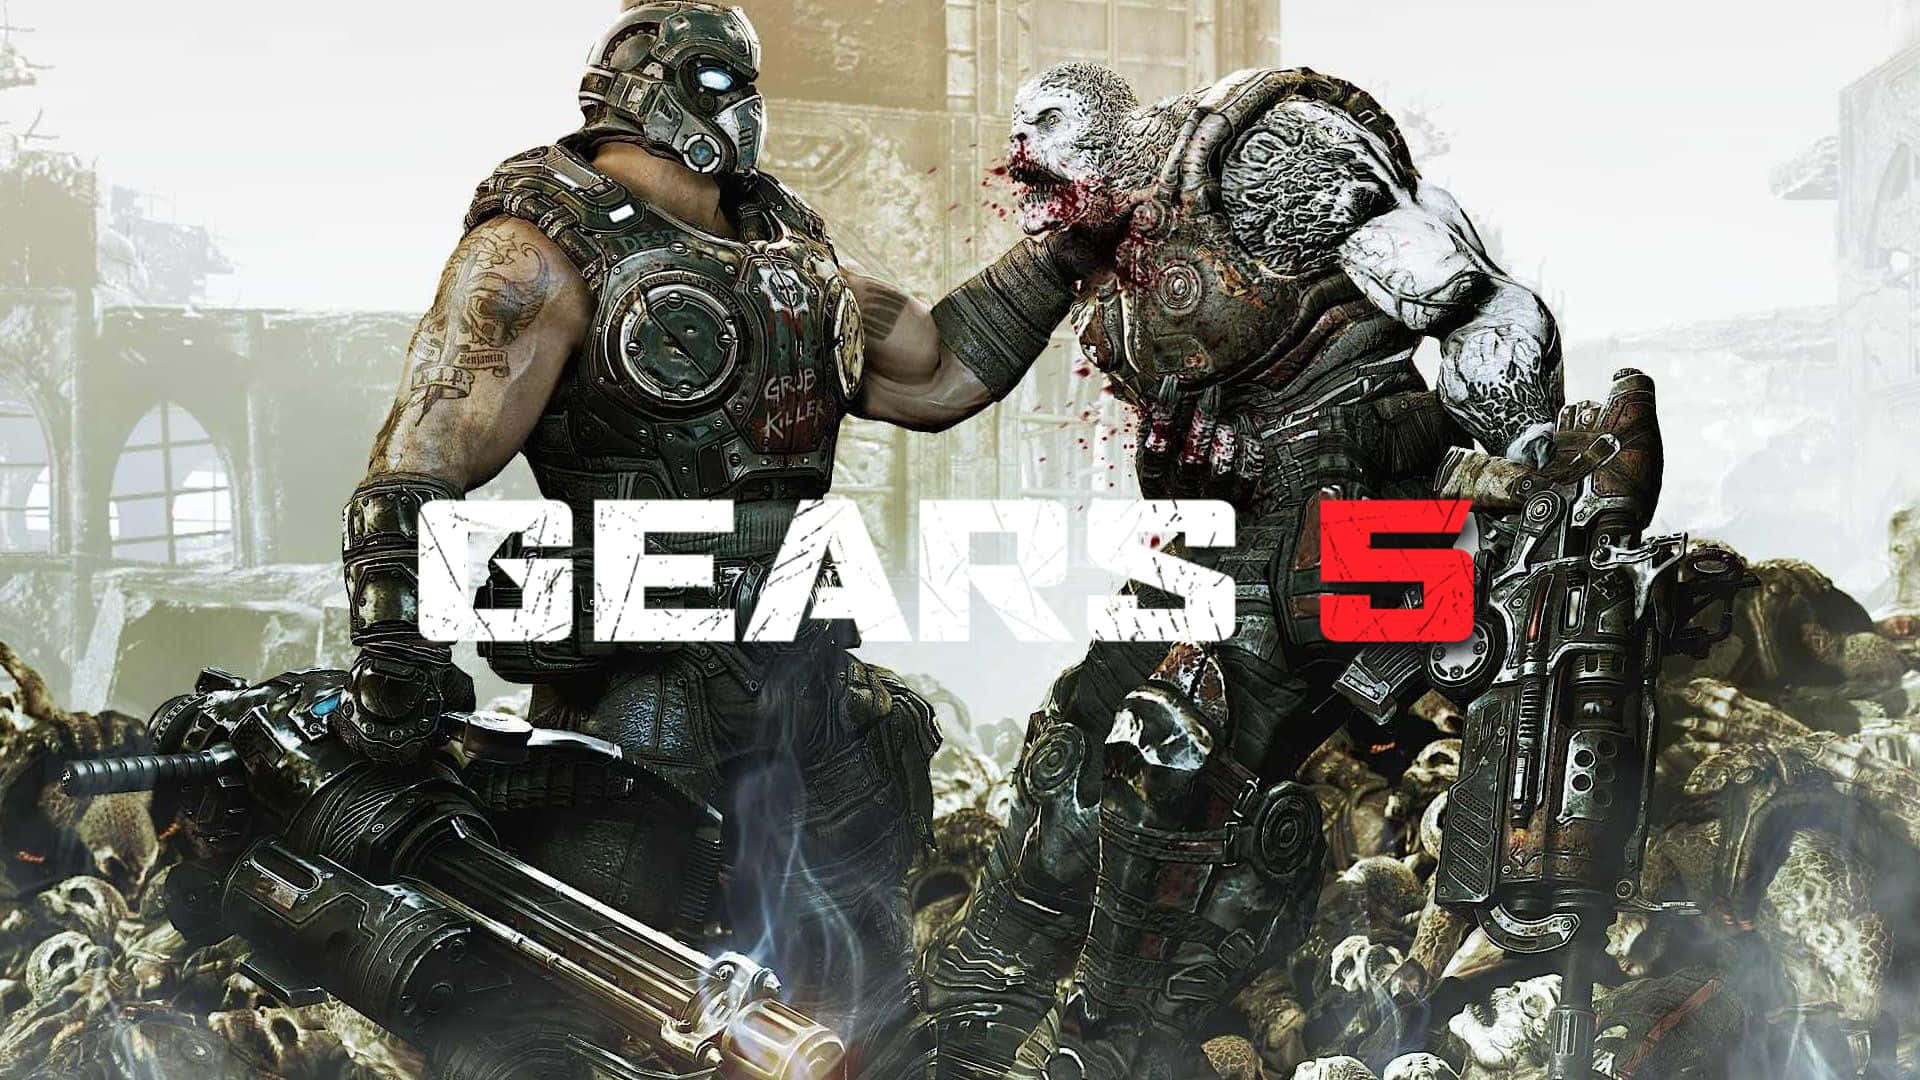 A glimpse into the iconic world of Gears of War 5